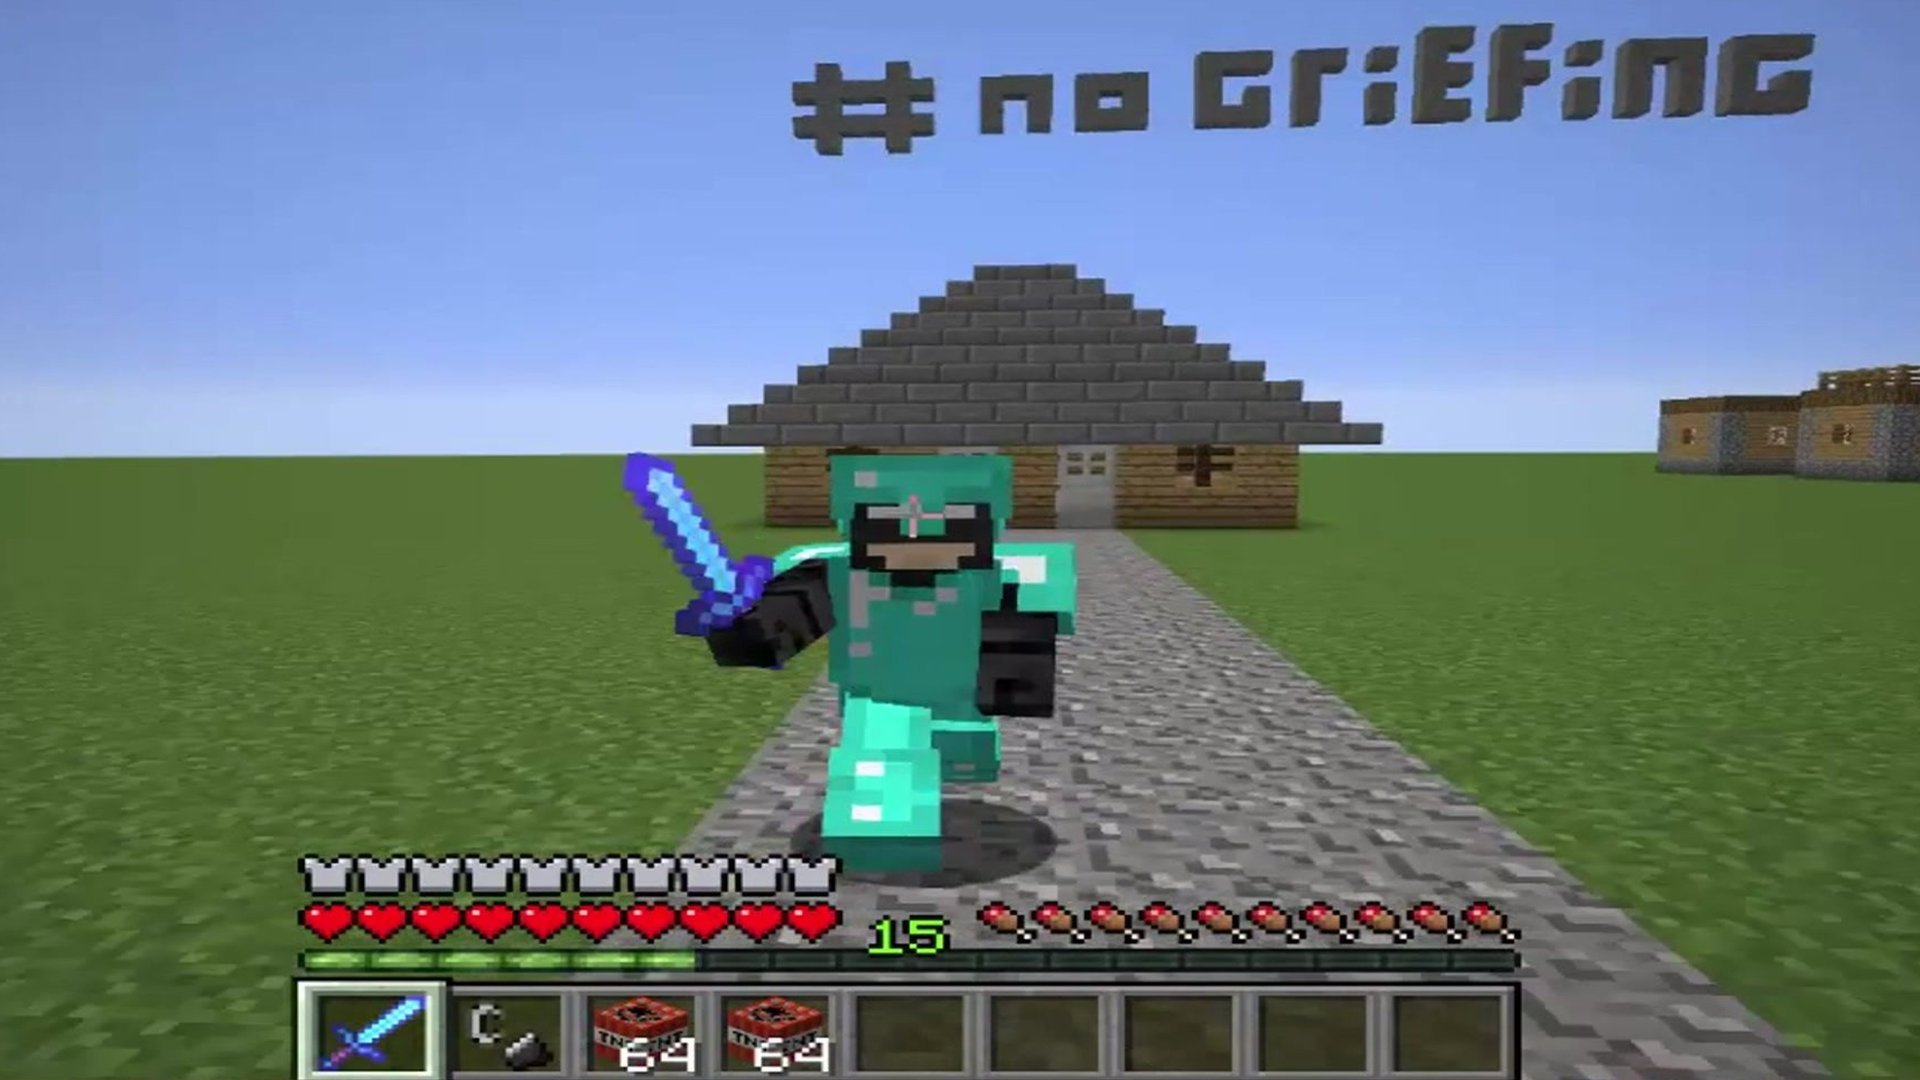 What is griefing and trolling in Minecraft?